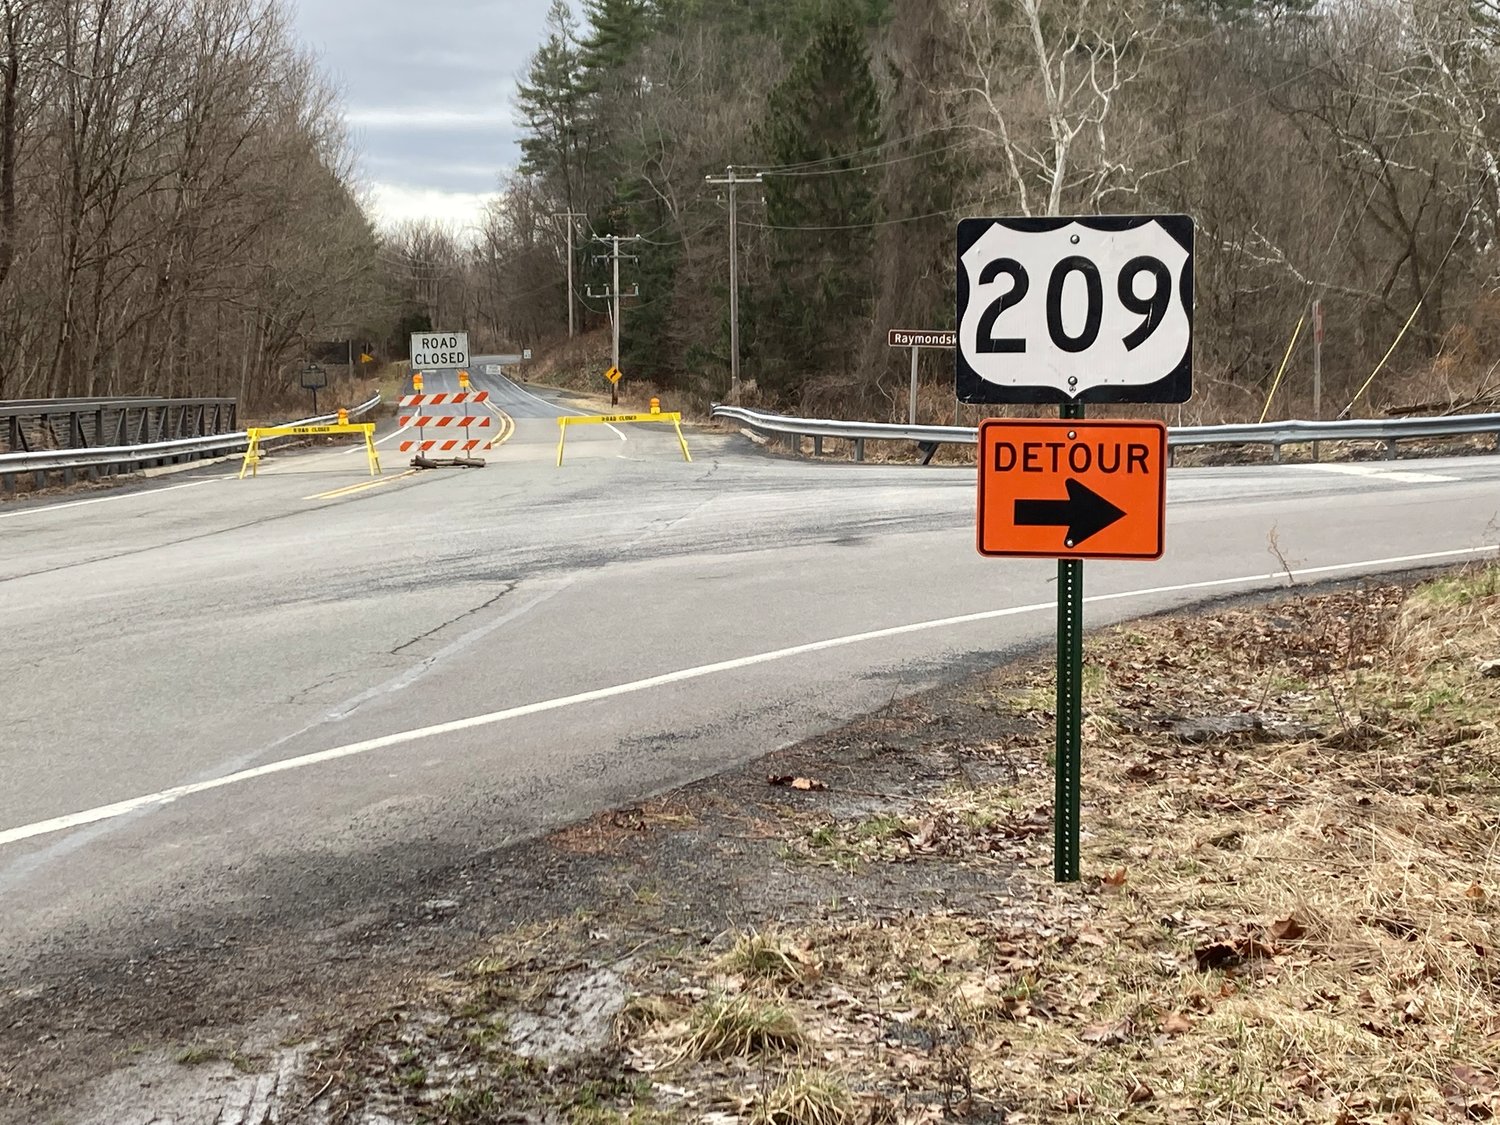 Traffic is being detoured on Rayomondskill Falls Road and Route 739 until traffic lights are installed to allow a single lane of traffic on the weakened road.